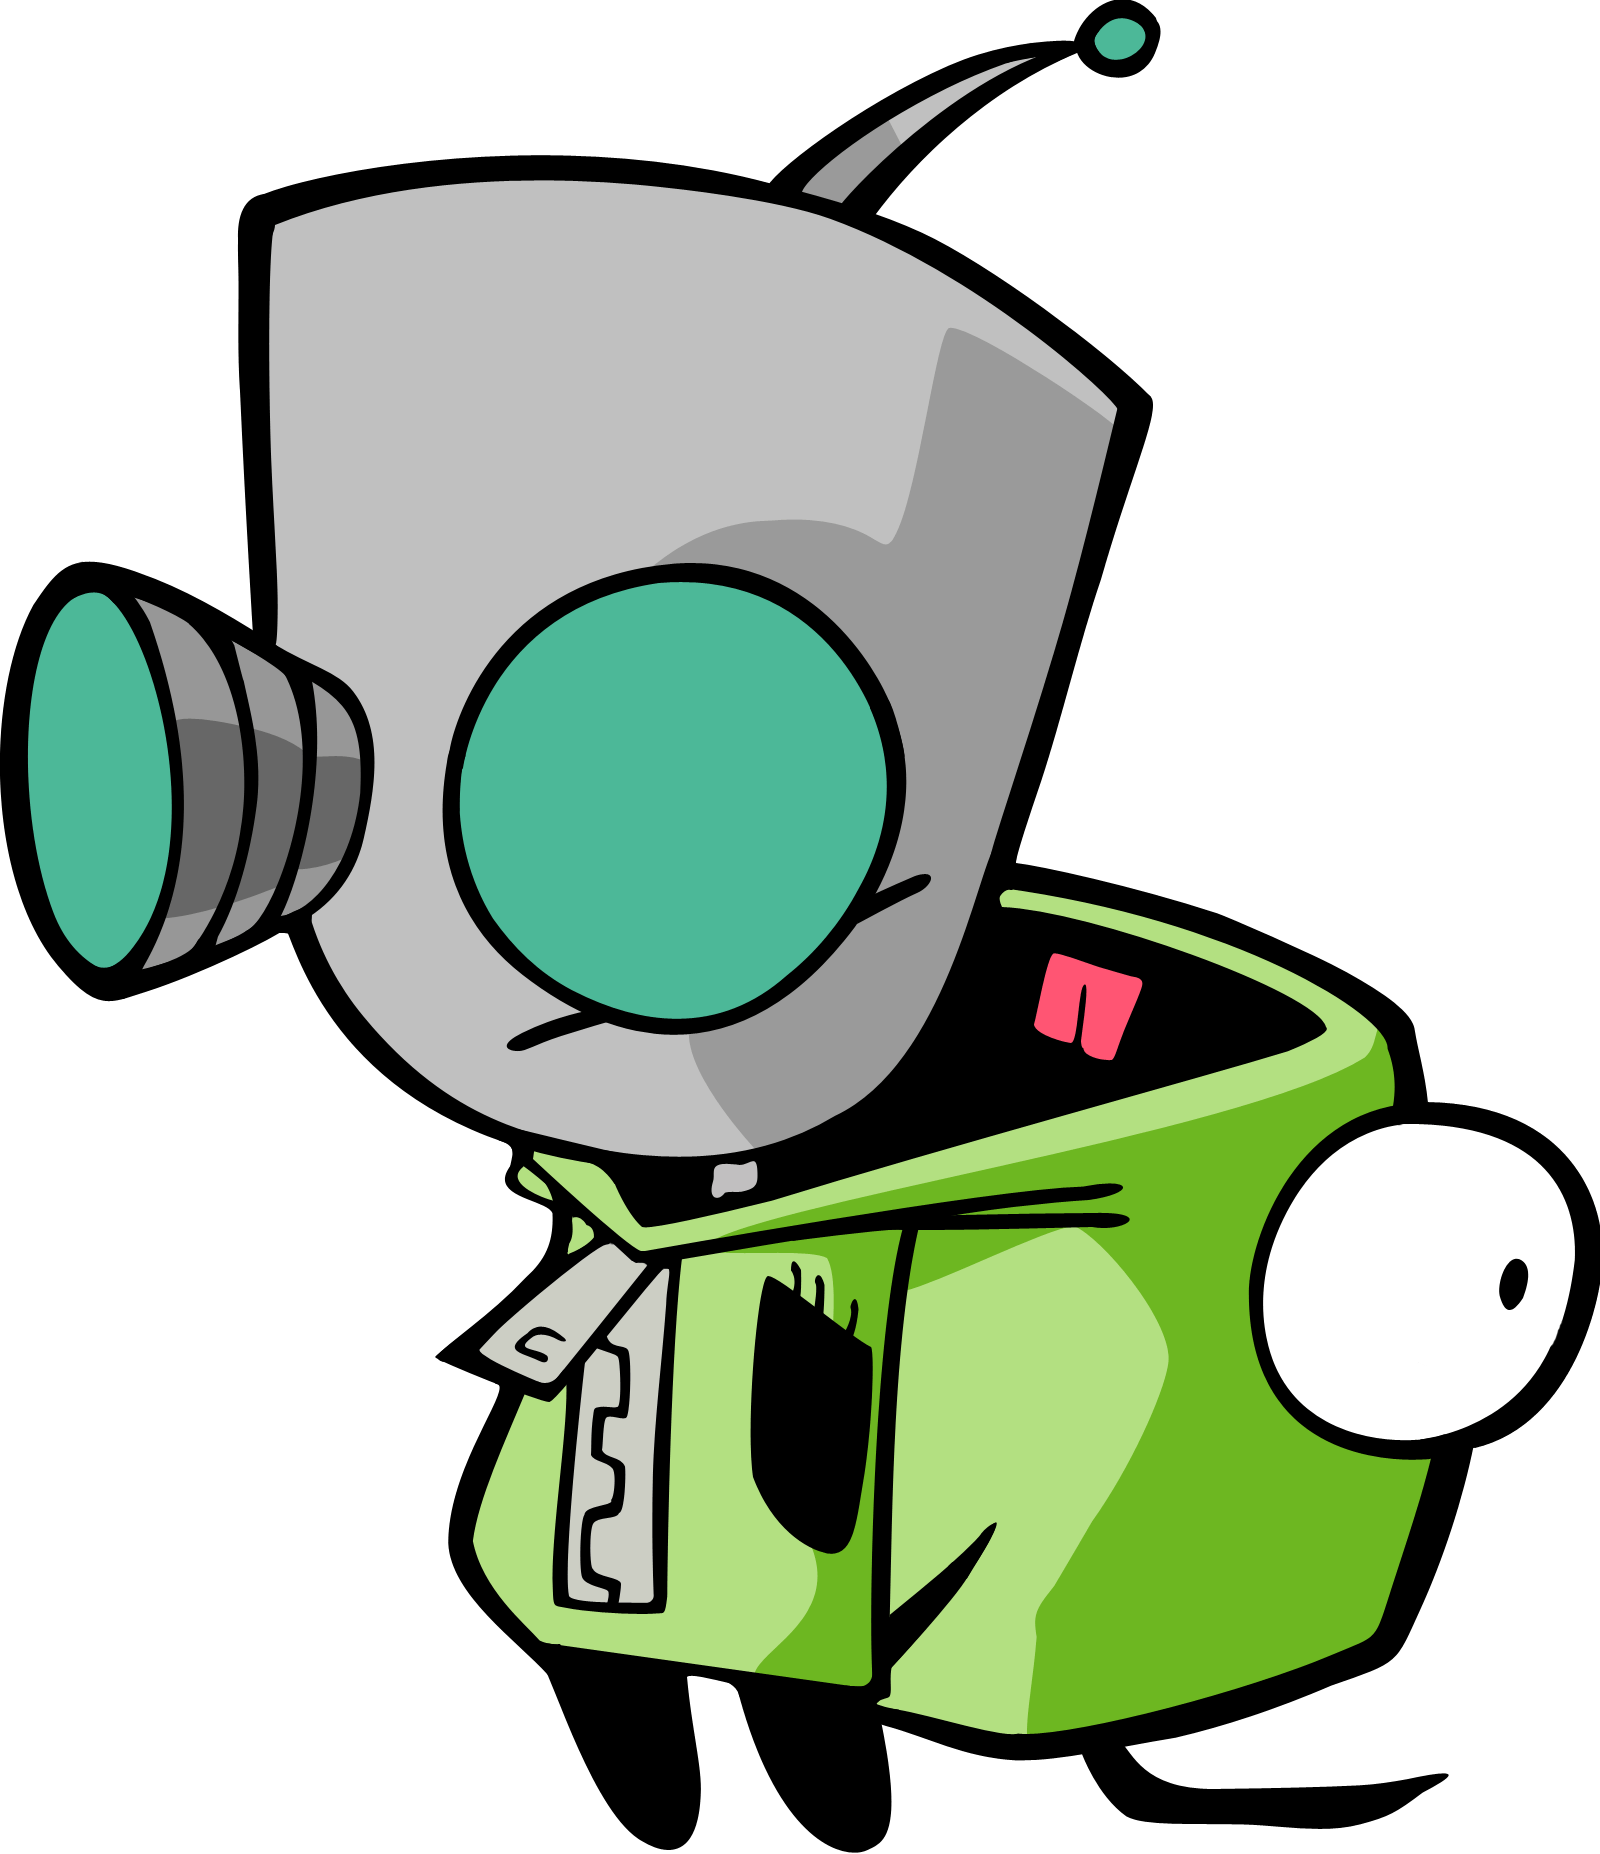 Gir (Invader Zim). Publish with Glogster!